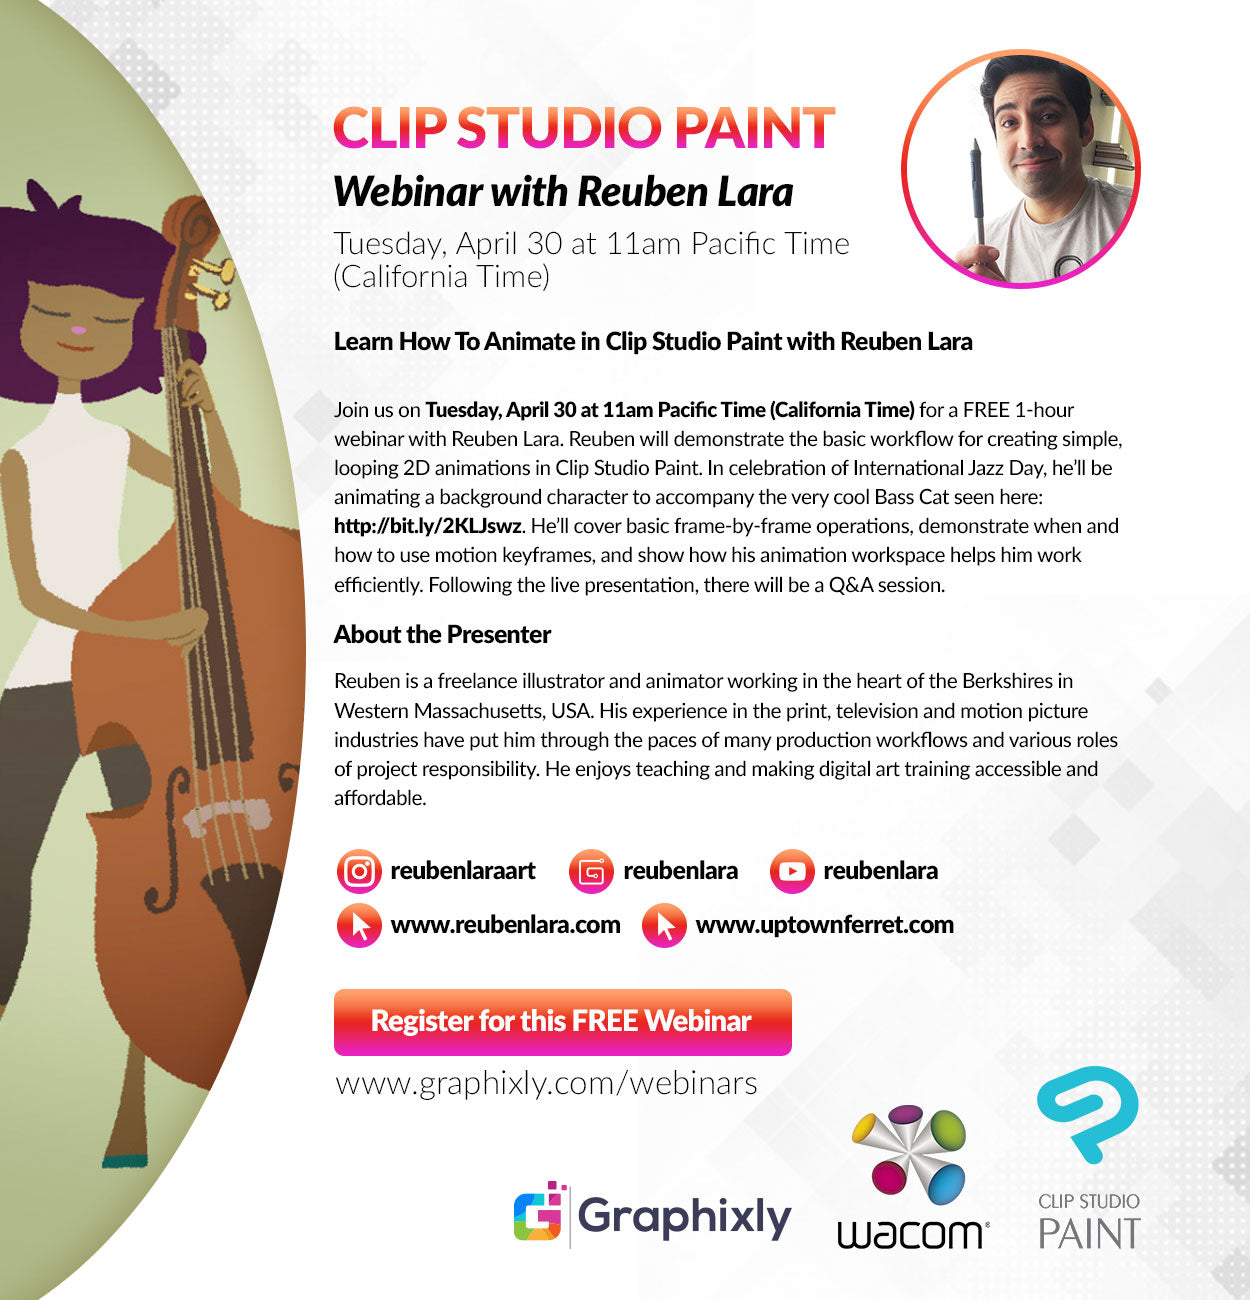 Webinar – Learn How To Animate in Clip Studio Paint with Reuben Lara